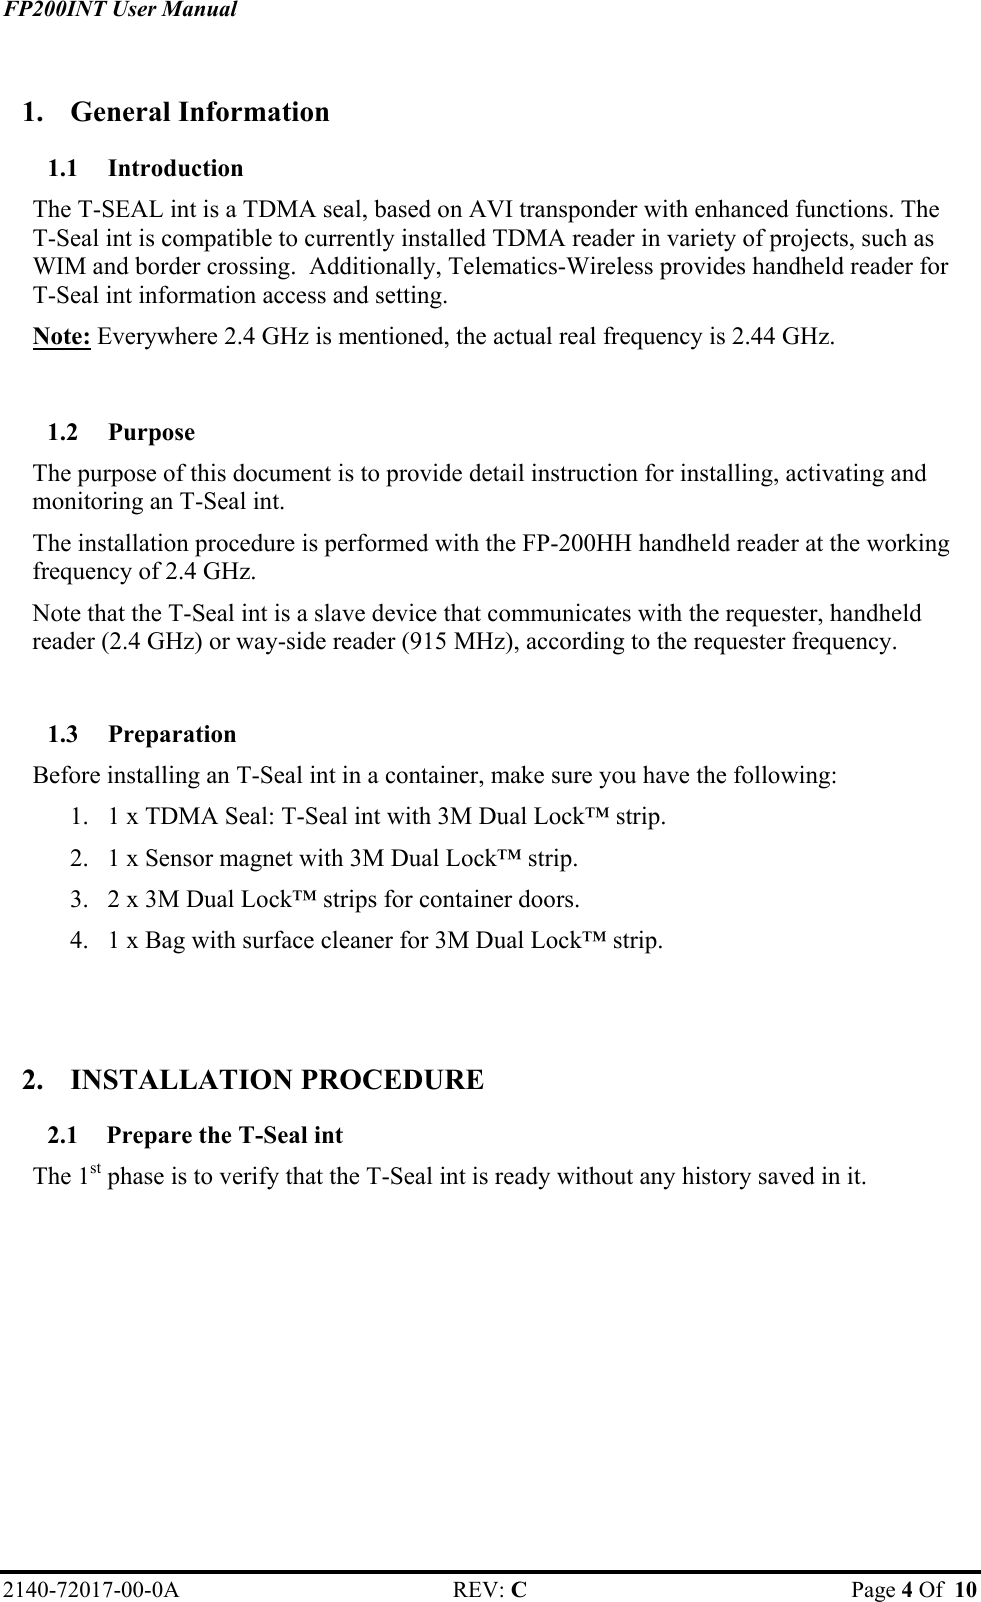 FP200INT User Manual  1. General Information 1.1 Introduction The T-SEAL int is a TDMA seal, based on AVI transponder with enhanced functions. The  T-Seal int is compatible to currently installed TDMA reader in variety of projects, such as WIM and border crossing.  Additionally, Telematics-Wireless provides handheld reader for  T-Seal int information access and setting.  Note: Everywhere 2.4 GHz is mentioned, the actual real frequency is 2.44 GHz.  1.2 Purpose The purpose of this document is to provide detail instruction for installing, activating and monitoring an T-Seal int. The installation procedure is performed with the FP-200HH handheld reader at the working frequency of 2.4 GHz.  Note that the T-Seal int is a slave device that communicates with the requester, handheld reader (2.4 GHz) or way-side reader (915 MHz), according to the requester frequency.  1.3 Preparation Before installing an T-Seal int in a container, make sure you have the following: 1.  1 x TDMA Seal: T-Seal int with 3M Dual Lock™ strip. 2.  1 x Sensor magnet with 3M Dual Lock™ strip. 3.  2 x 3M Dual Lock™ strips for container doors. 4.  1 x Bag with surface cleaner for 3M Dual Lock™ strip.   2. INSTALLATION PROCEDURE 2.1  Prepare the T-Seal int The 1st phase is to verify that the T-Seal int is ready without any history saved in it.  2140-72017-00-0A REV: C  Page 4 Of  10  